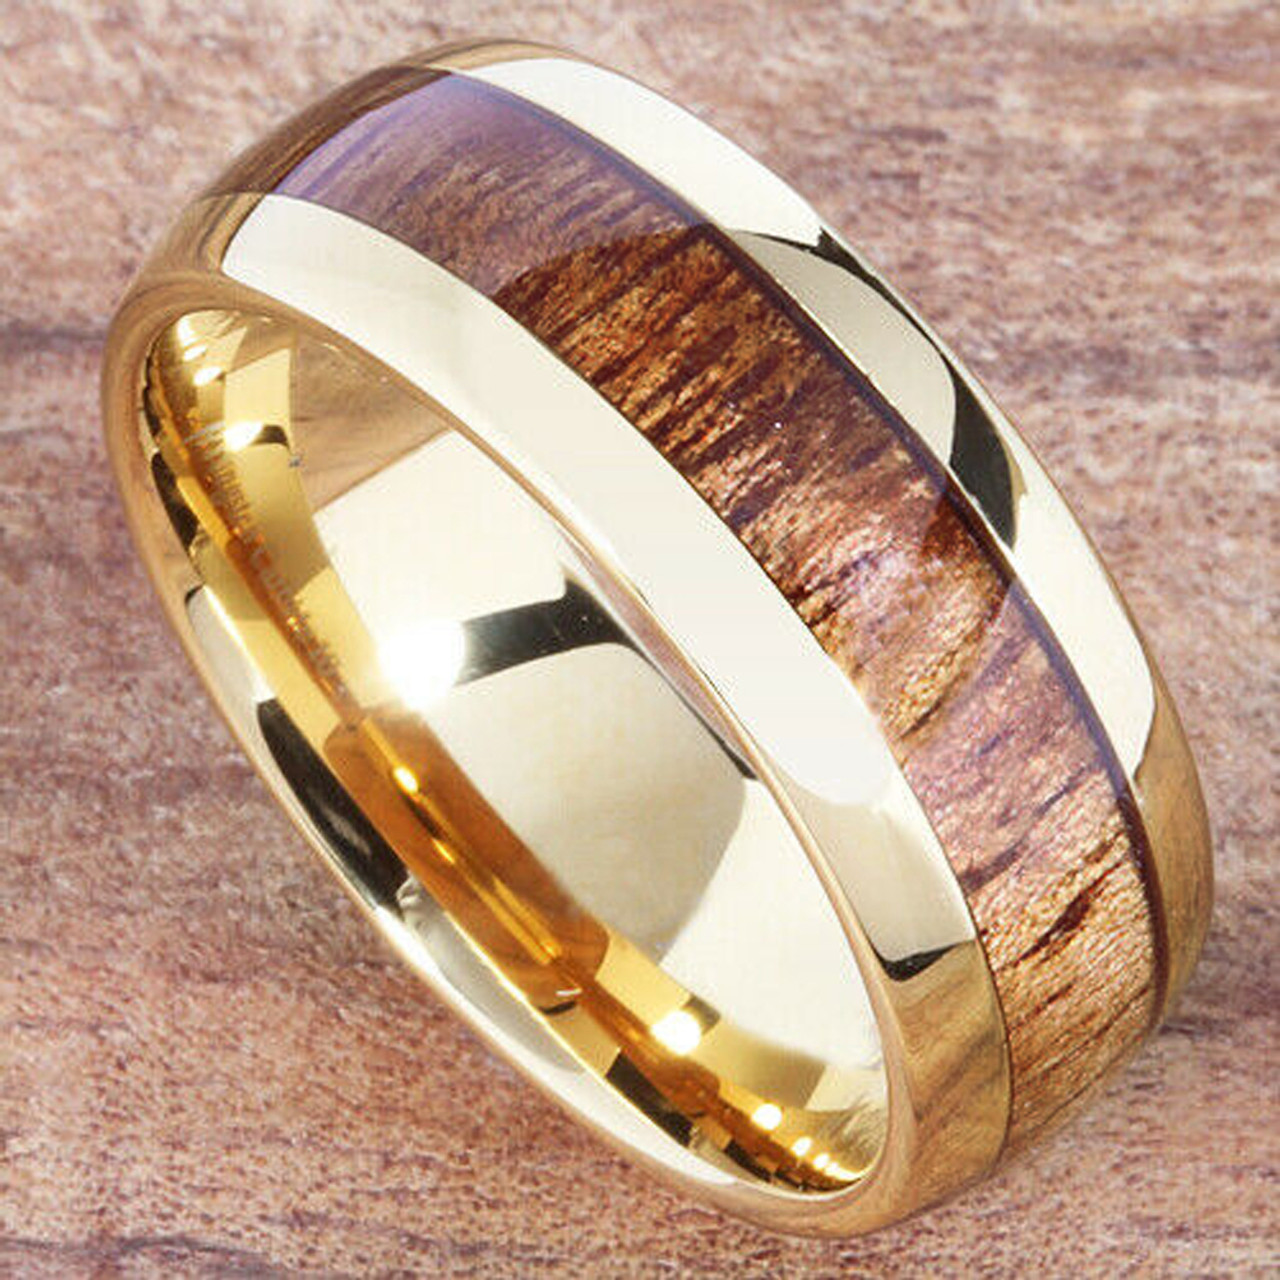 Men's Tungsten Wedding Bands (8mm). Wood Inlay and Yellow Gold Tone. Tungsten Ring with High Polish Dark Wood Inlay. Domed Ring